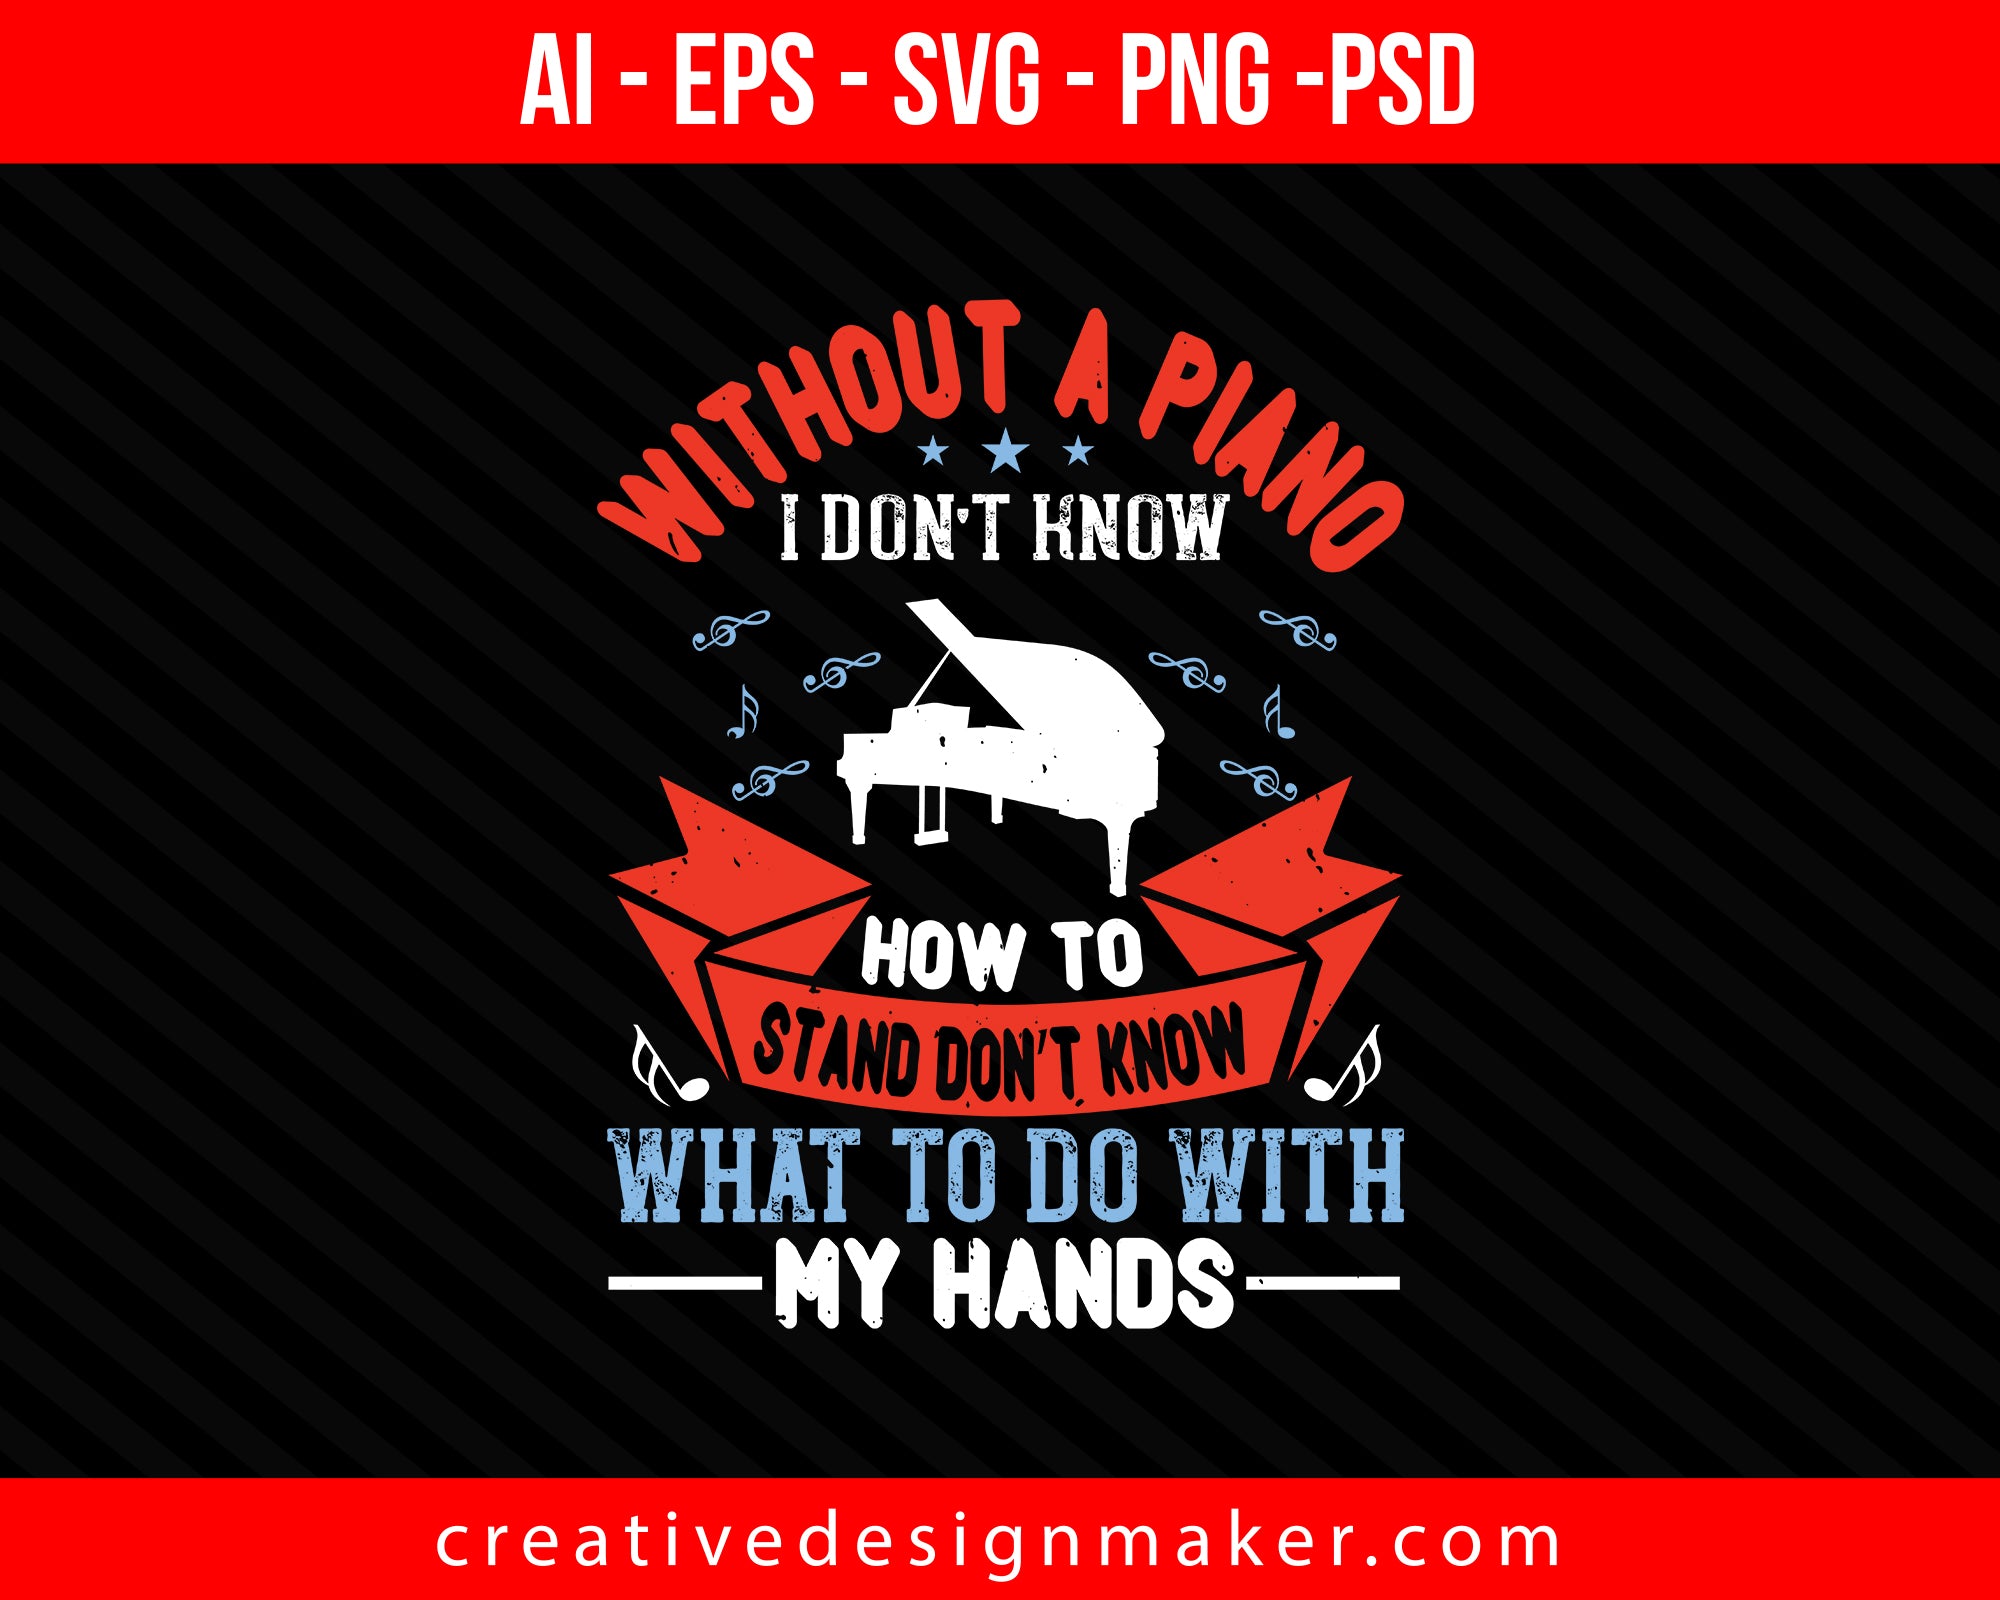 Without a piano I don’t know how to stand, don’t know what to do with my hands Print Ready Editable T-Shirt SVG Design!